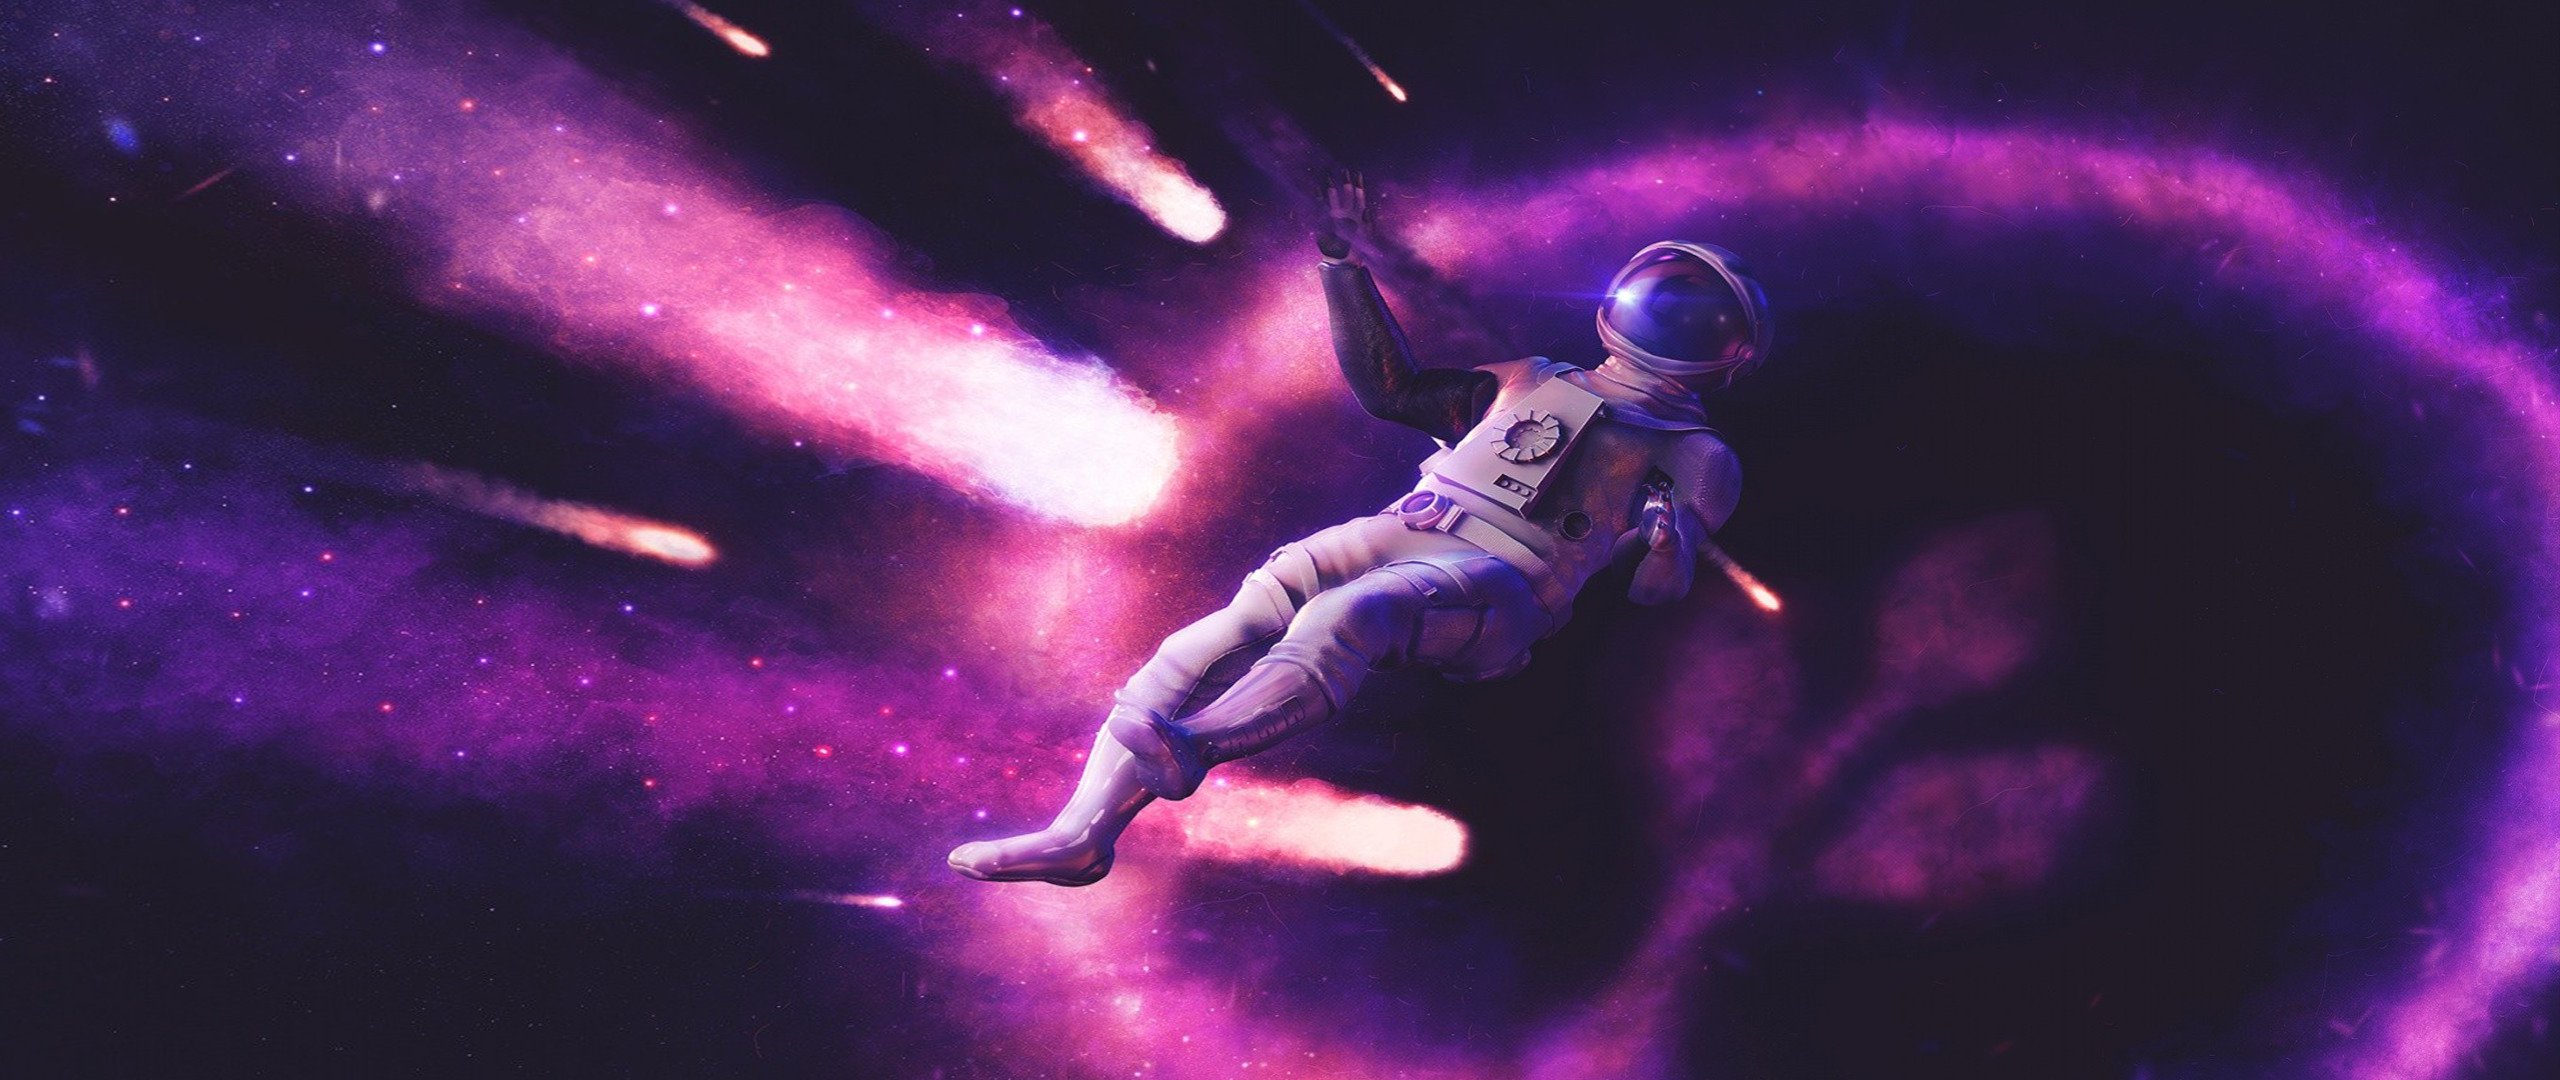 astronaut, Ultra wide, Space, Space art, Science fiction Wallpaper